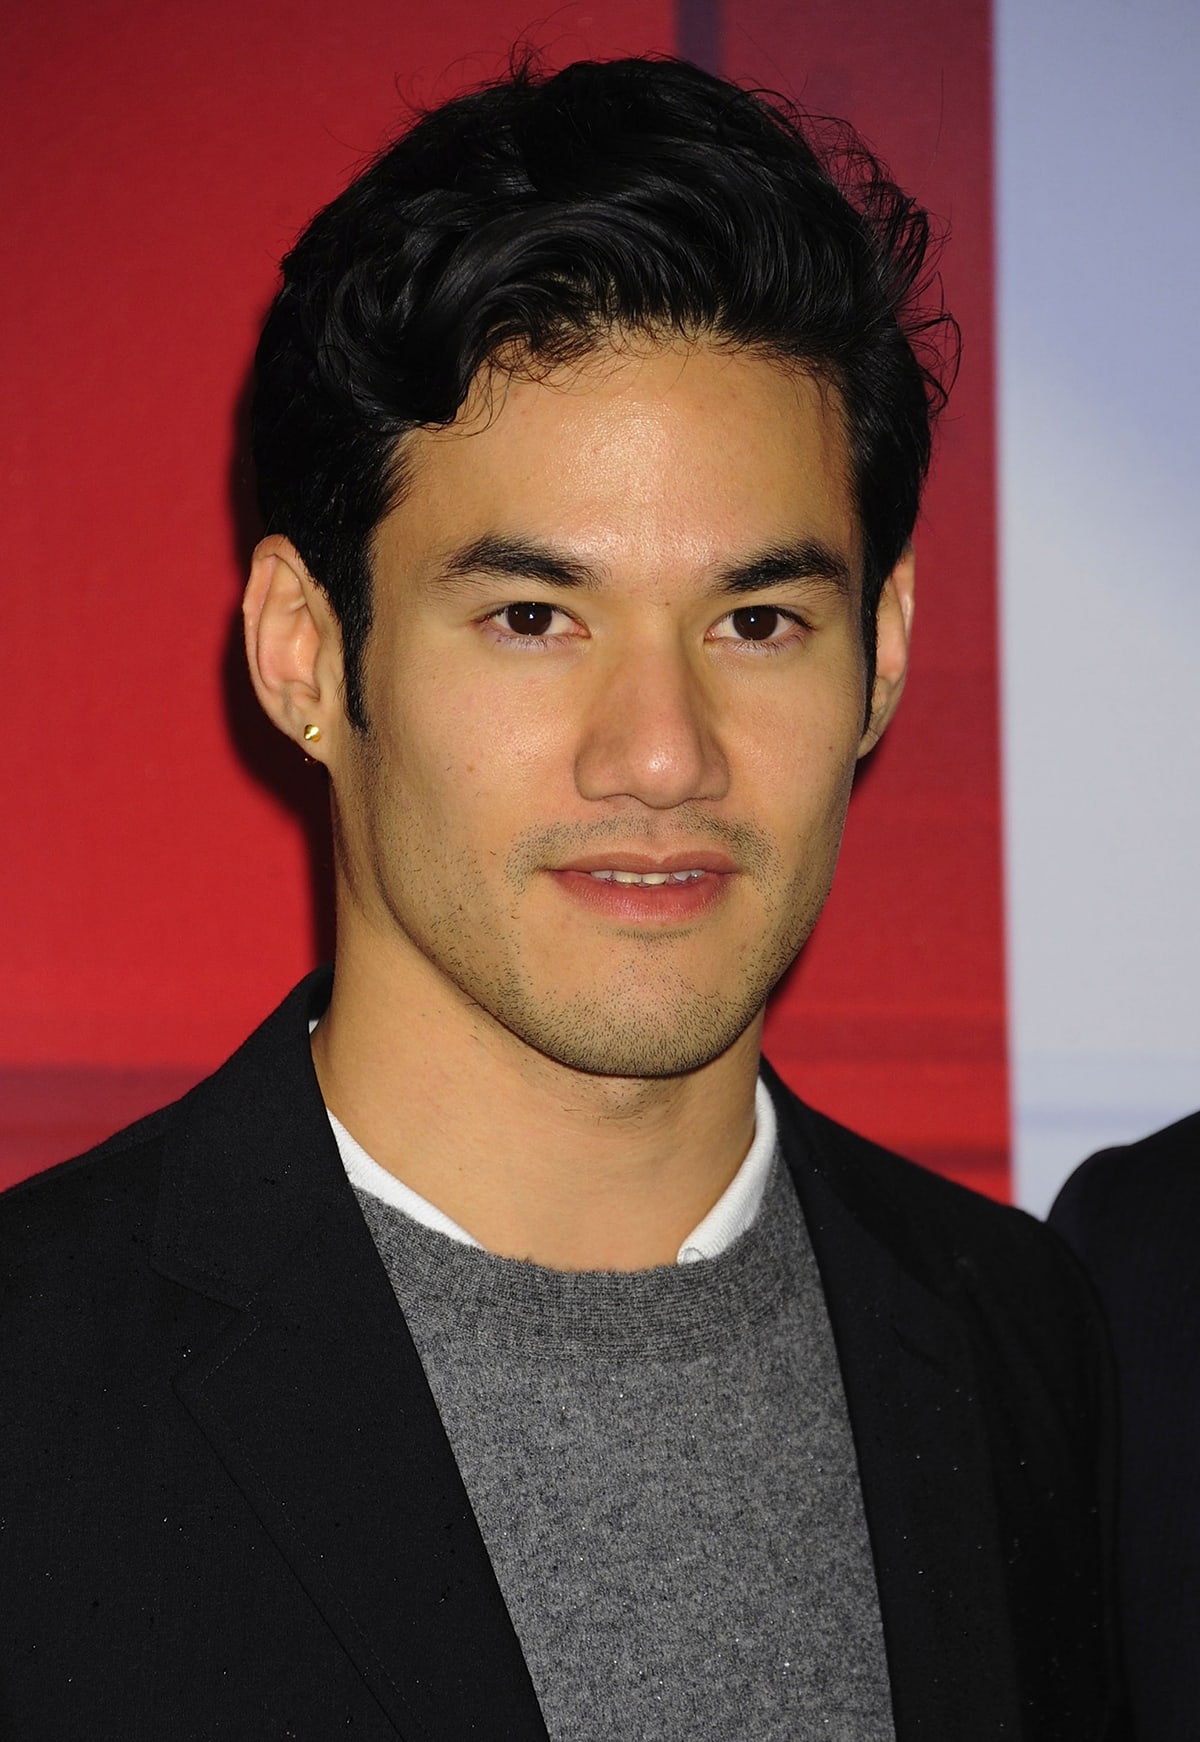 Born and raised in Paris, Joseph Altuzarra began his career in the fashion industry as an intern at Marc Jacobs in NYC